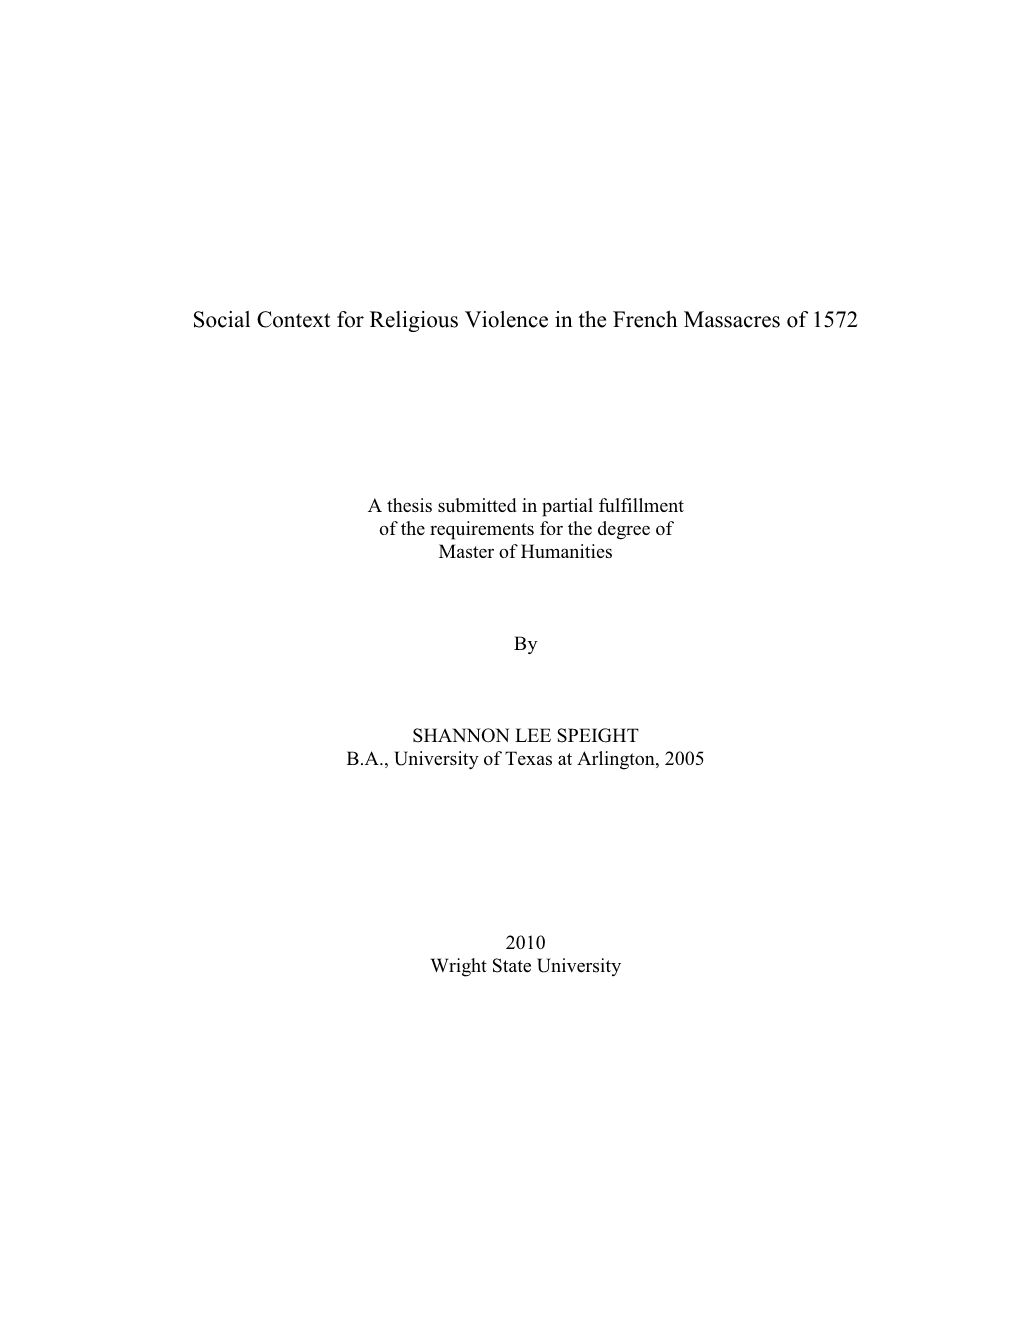 Social Context for Religious Violence in the French Massacres of 1572